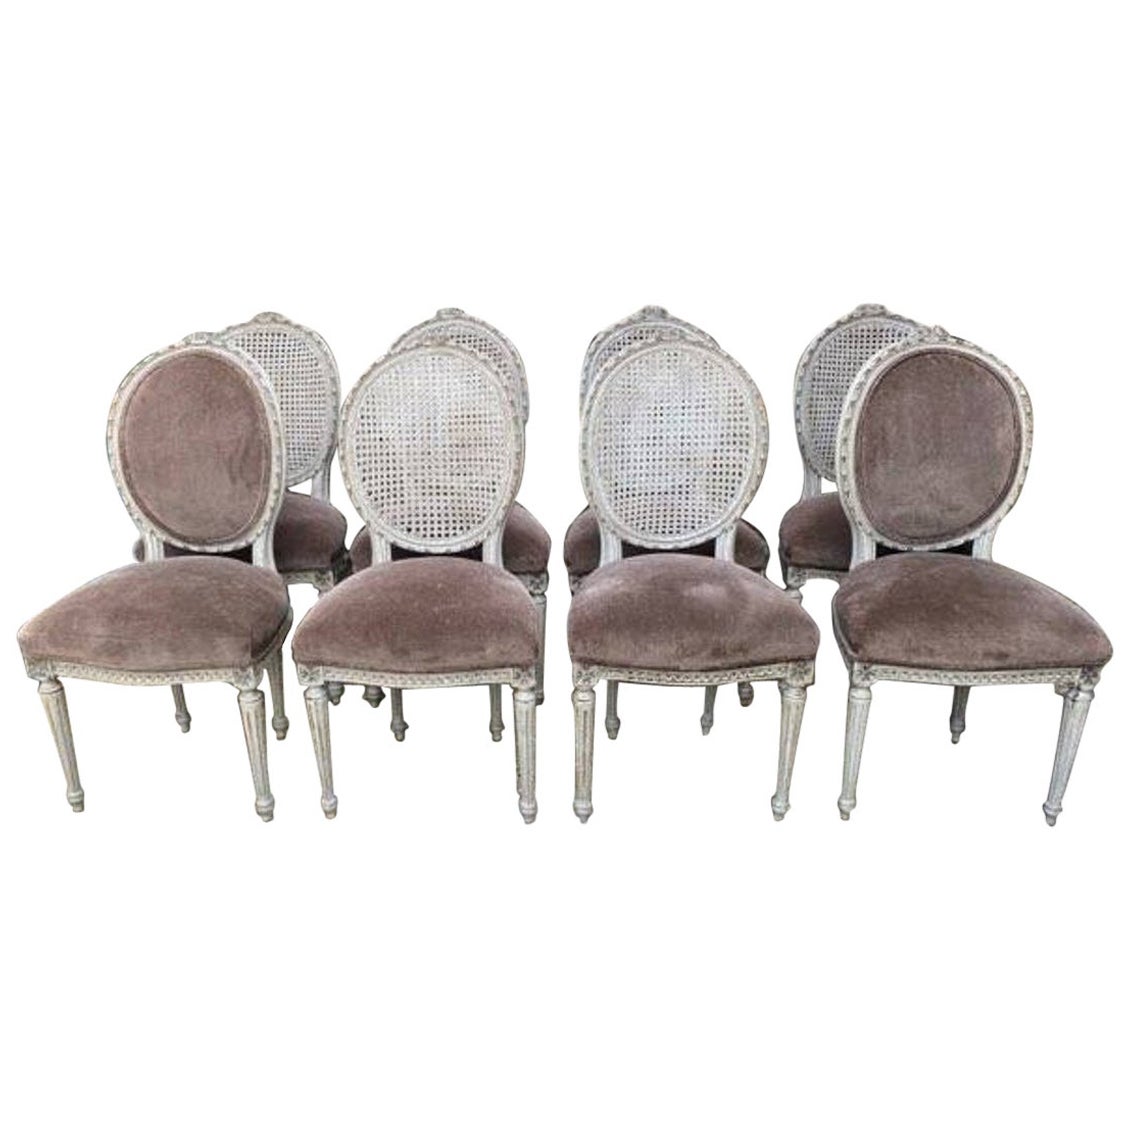 Set of Eight 19th Century French Cane Back Dining Chairs with Gray Velvet Seats